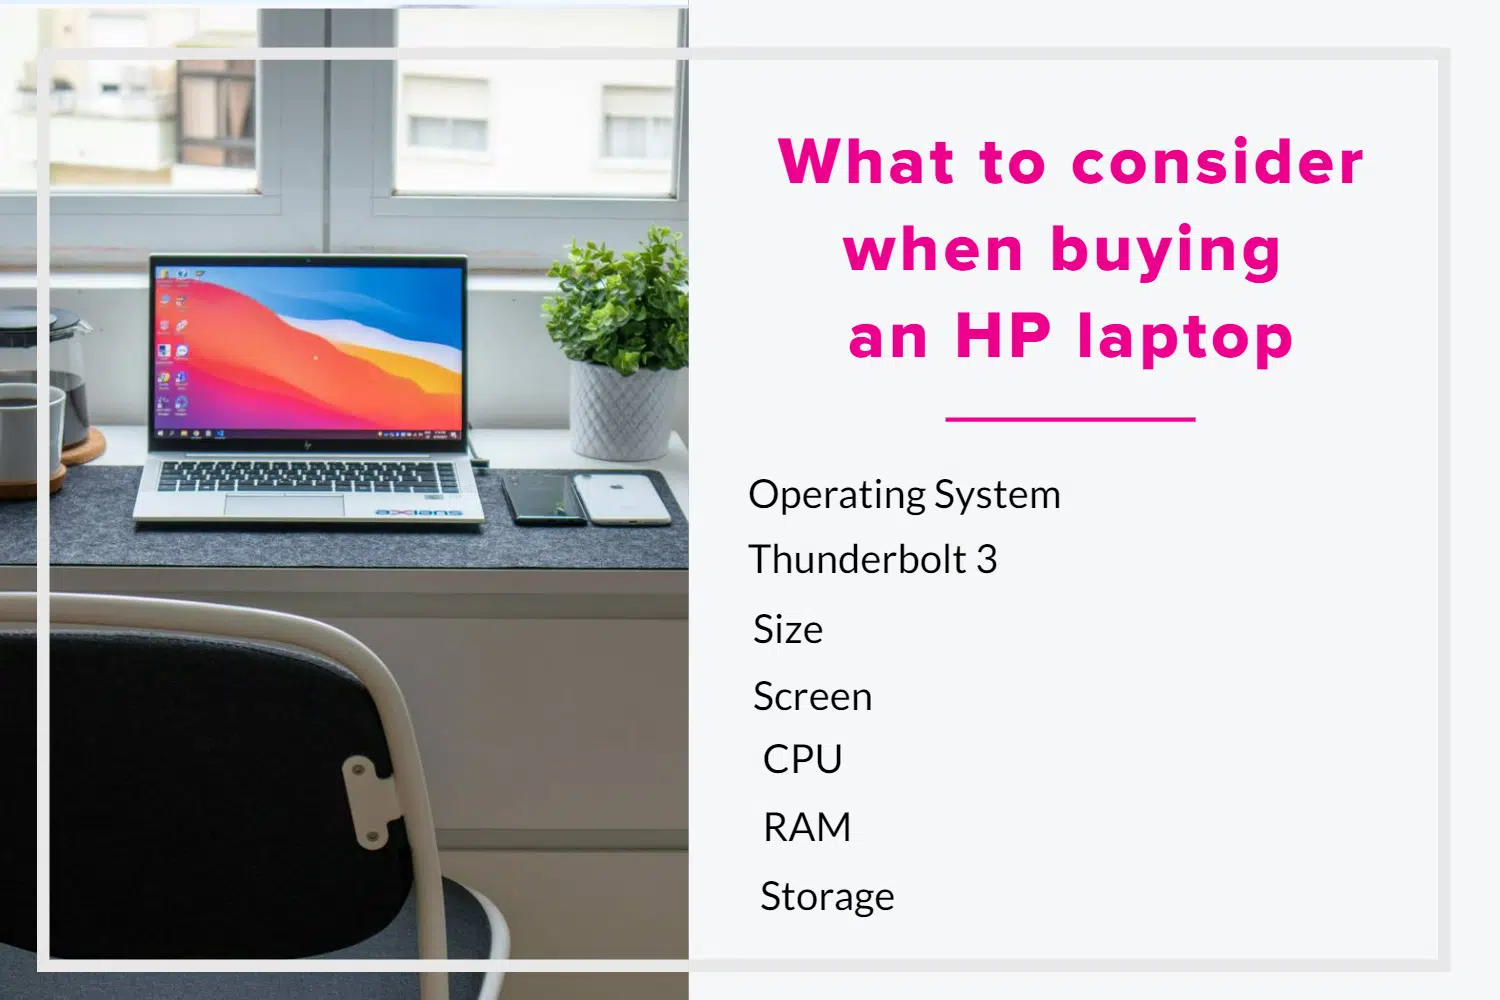 What to consider when buying an HP laptop